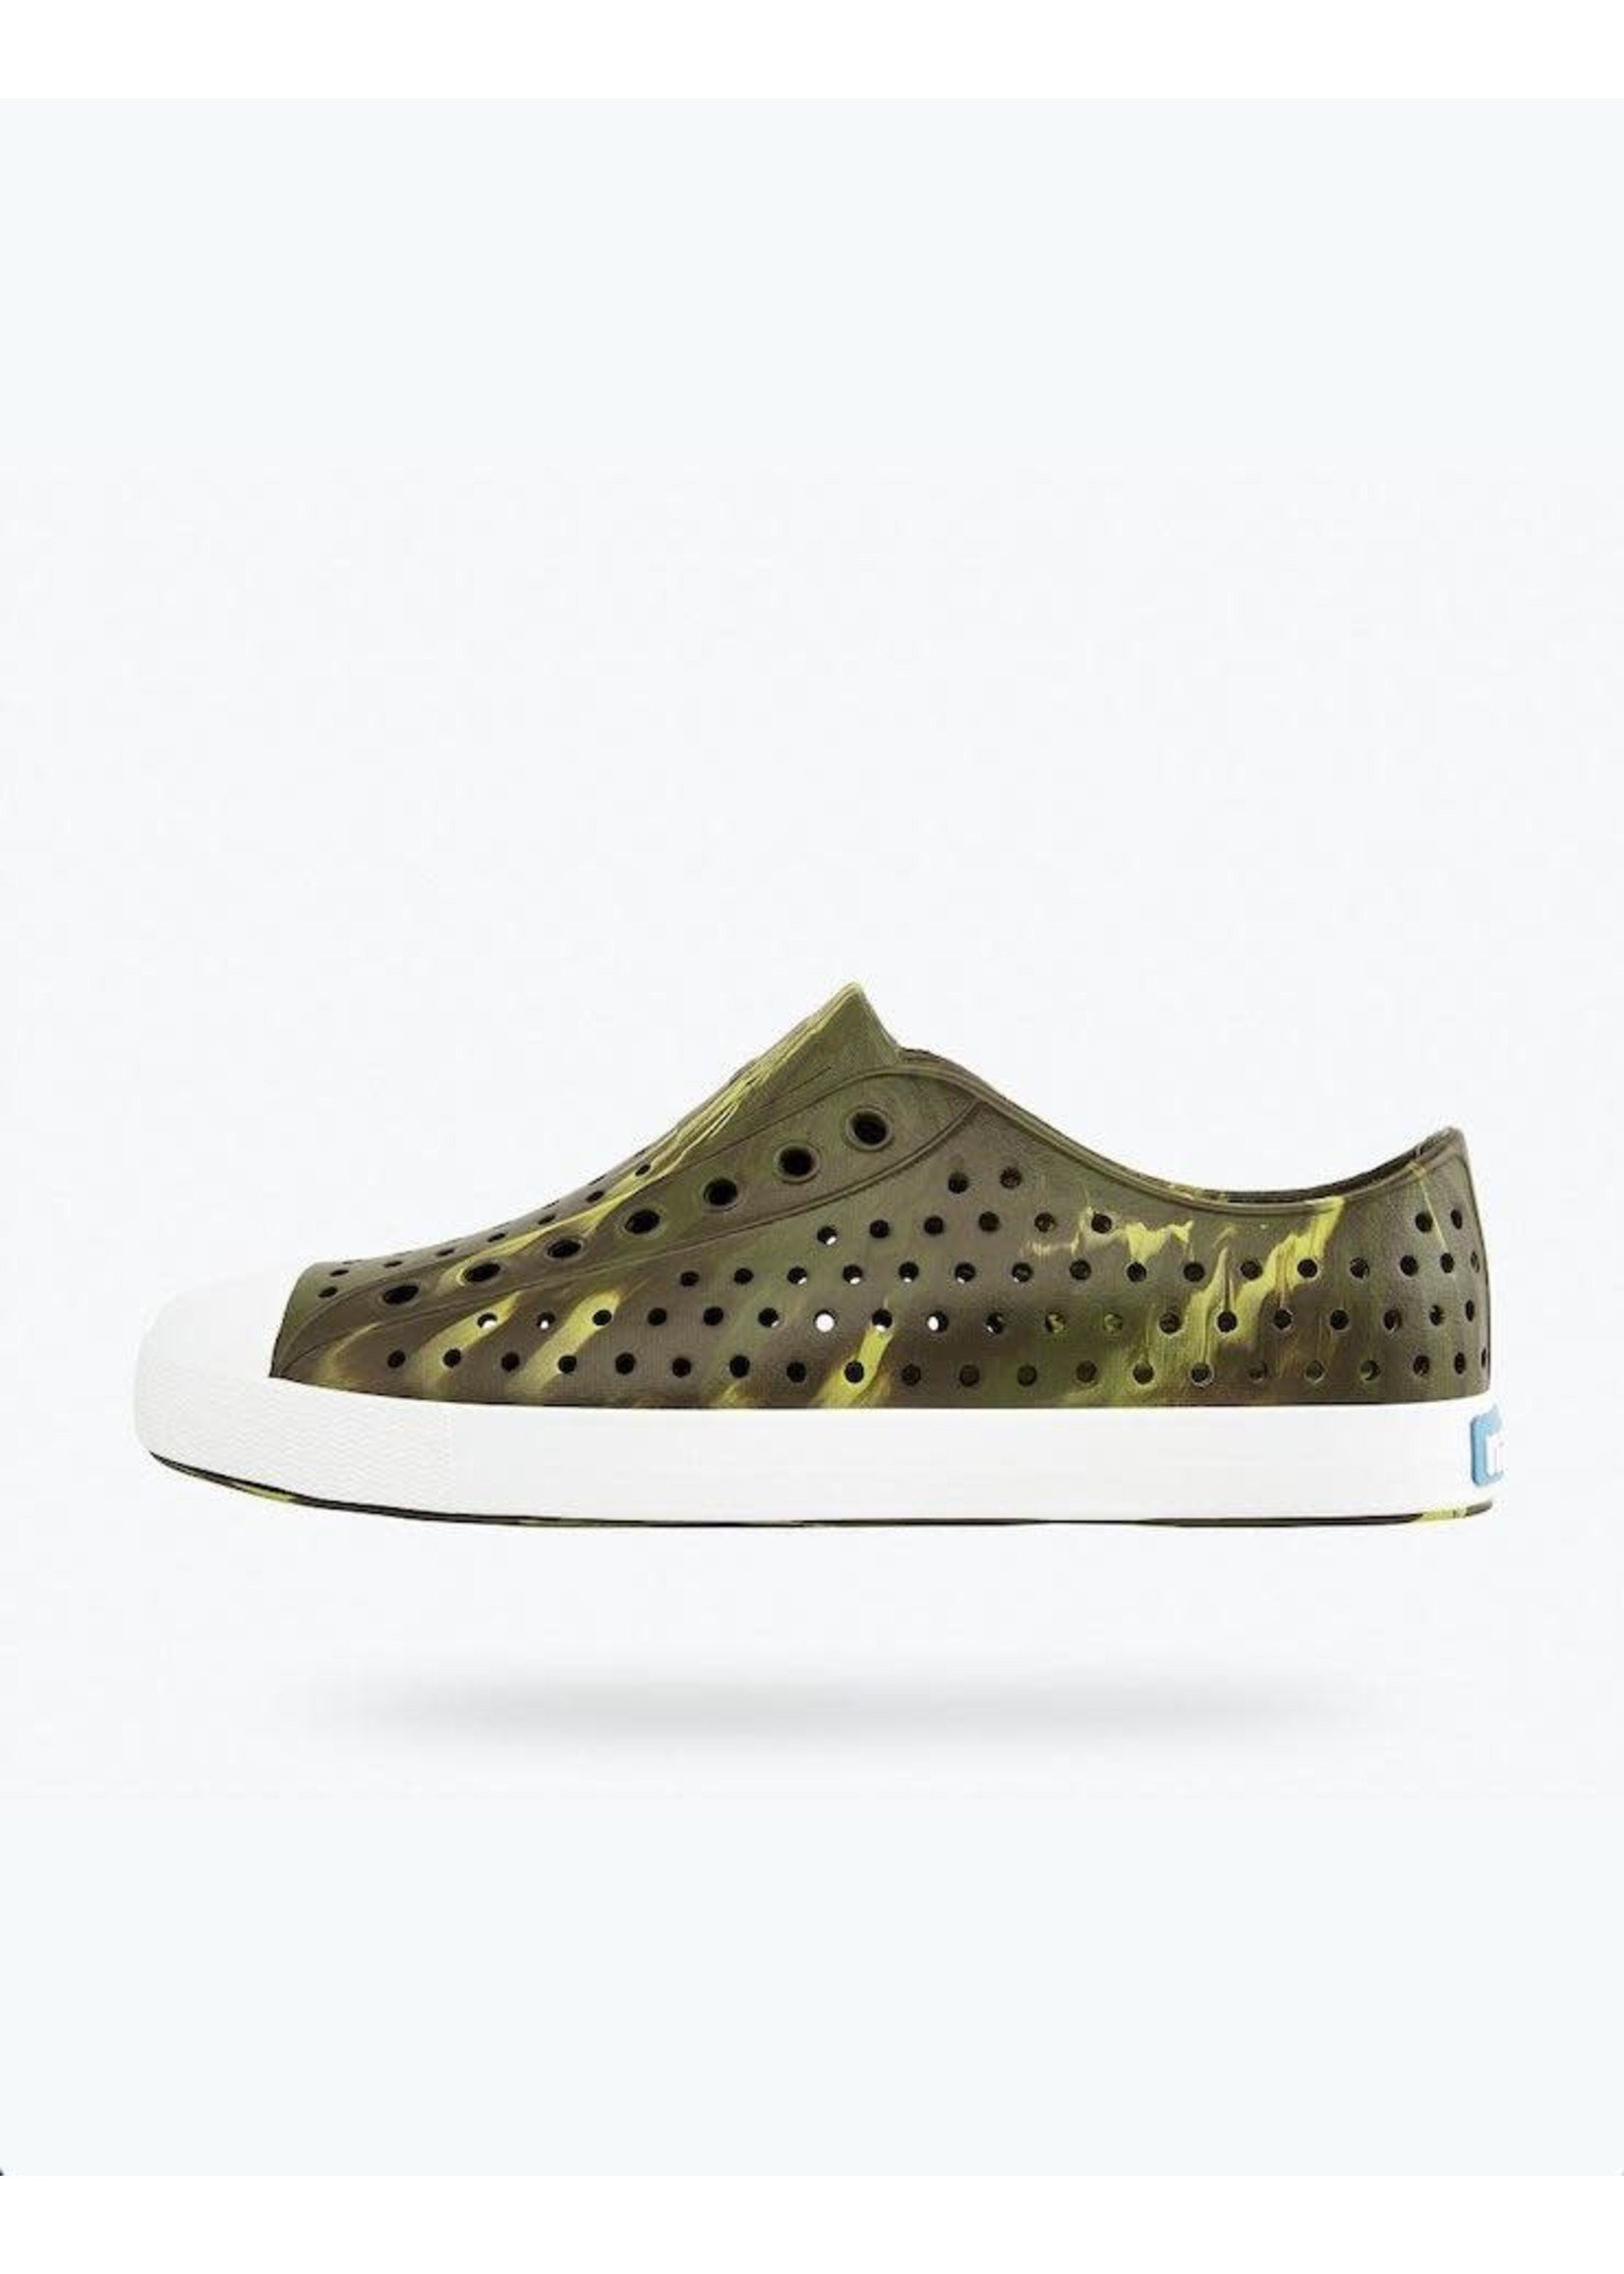 Native Shoes Native Shoes Jefferson Tuff Green/ Shell White/ Olivine Marble Marbled Adult